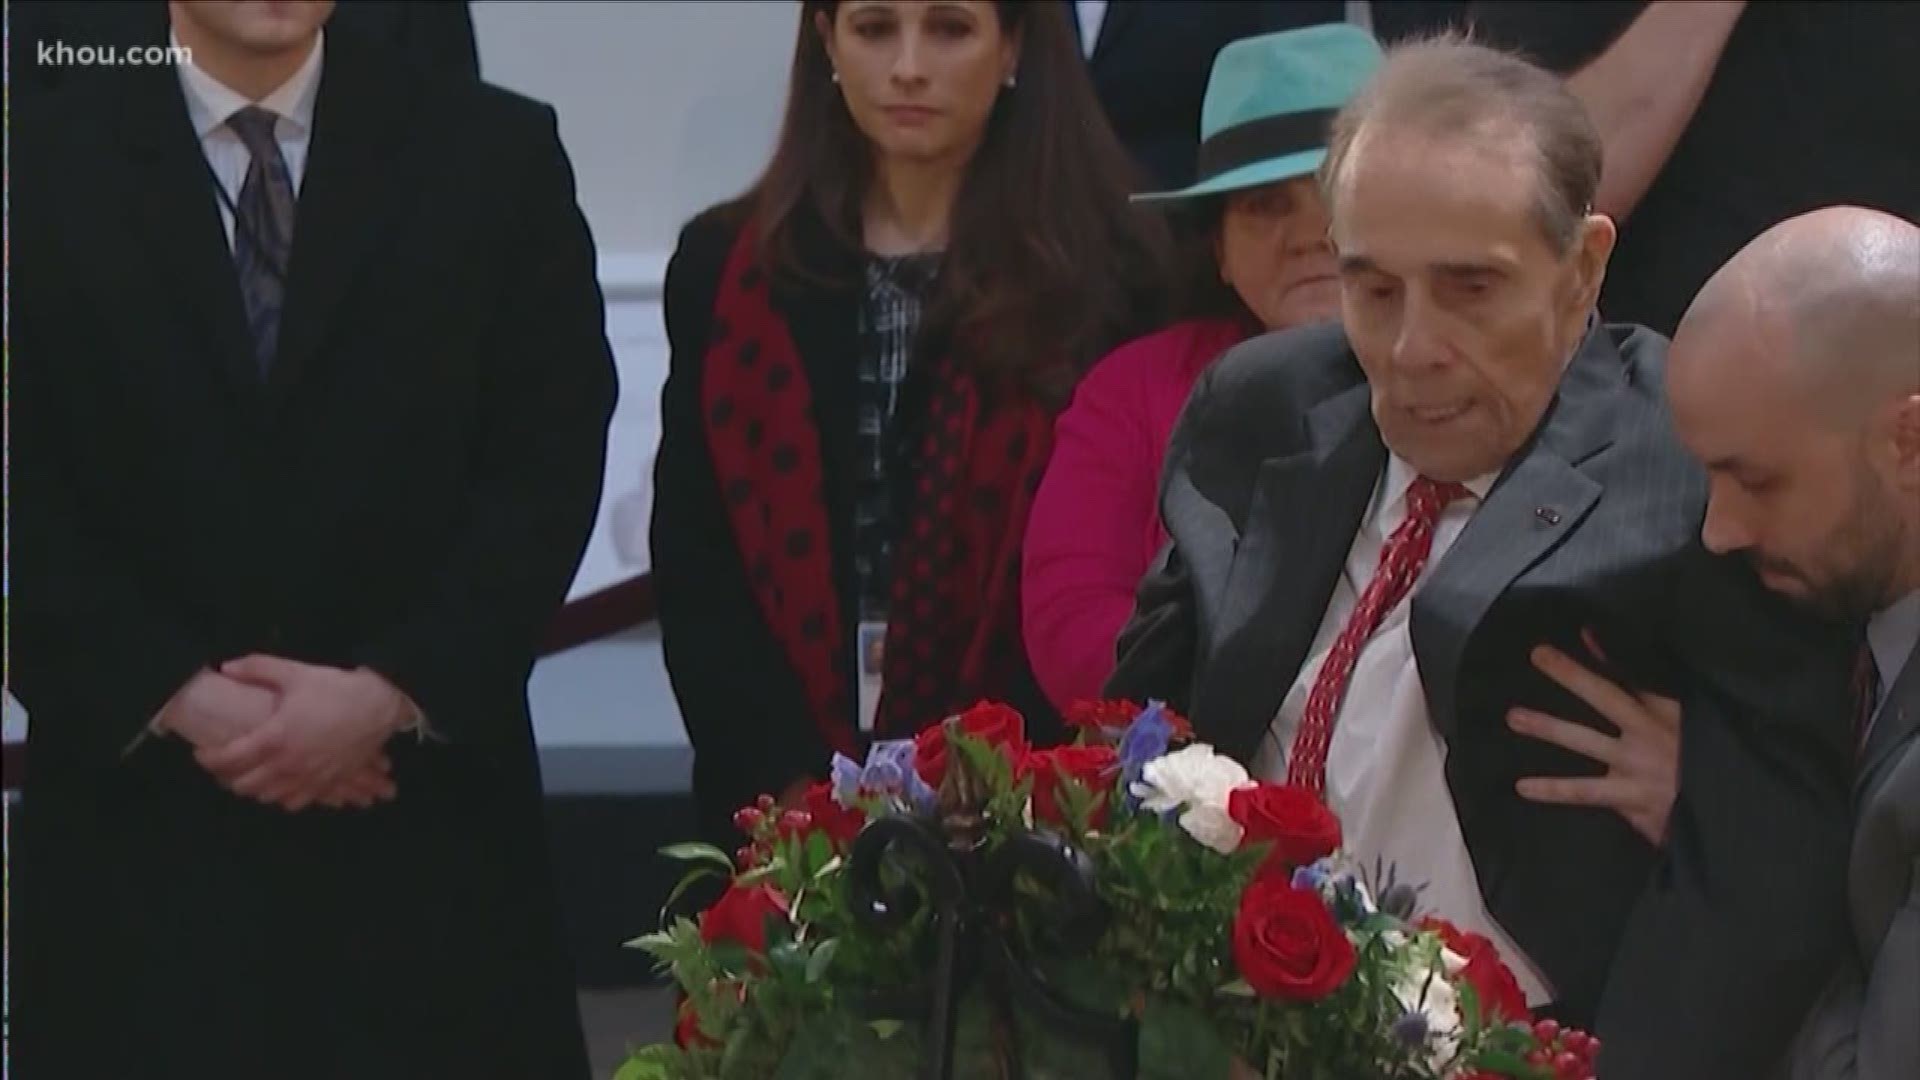 Former Sen. Bob Dole stood from his wheelchair to salute President George H.W. Bush's casket, and some Houstonians witnessed the touching moment at the U.S. Capitol.